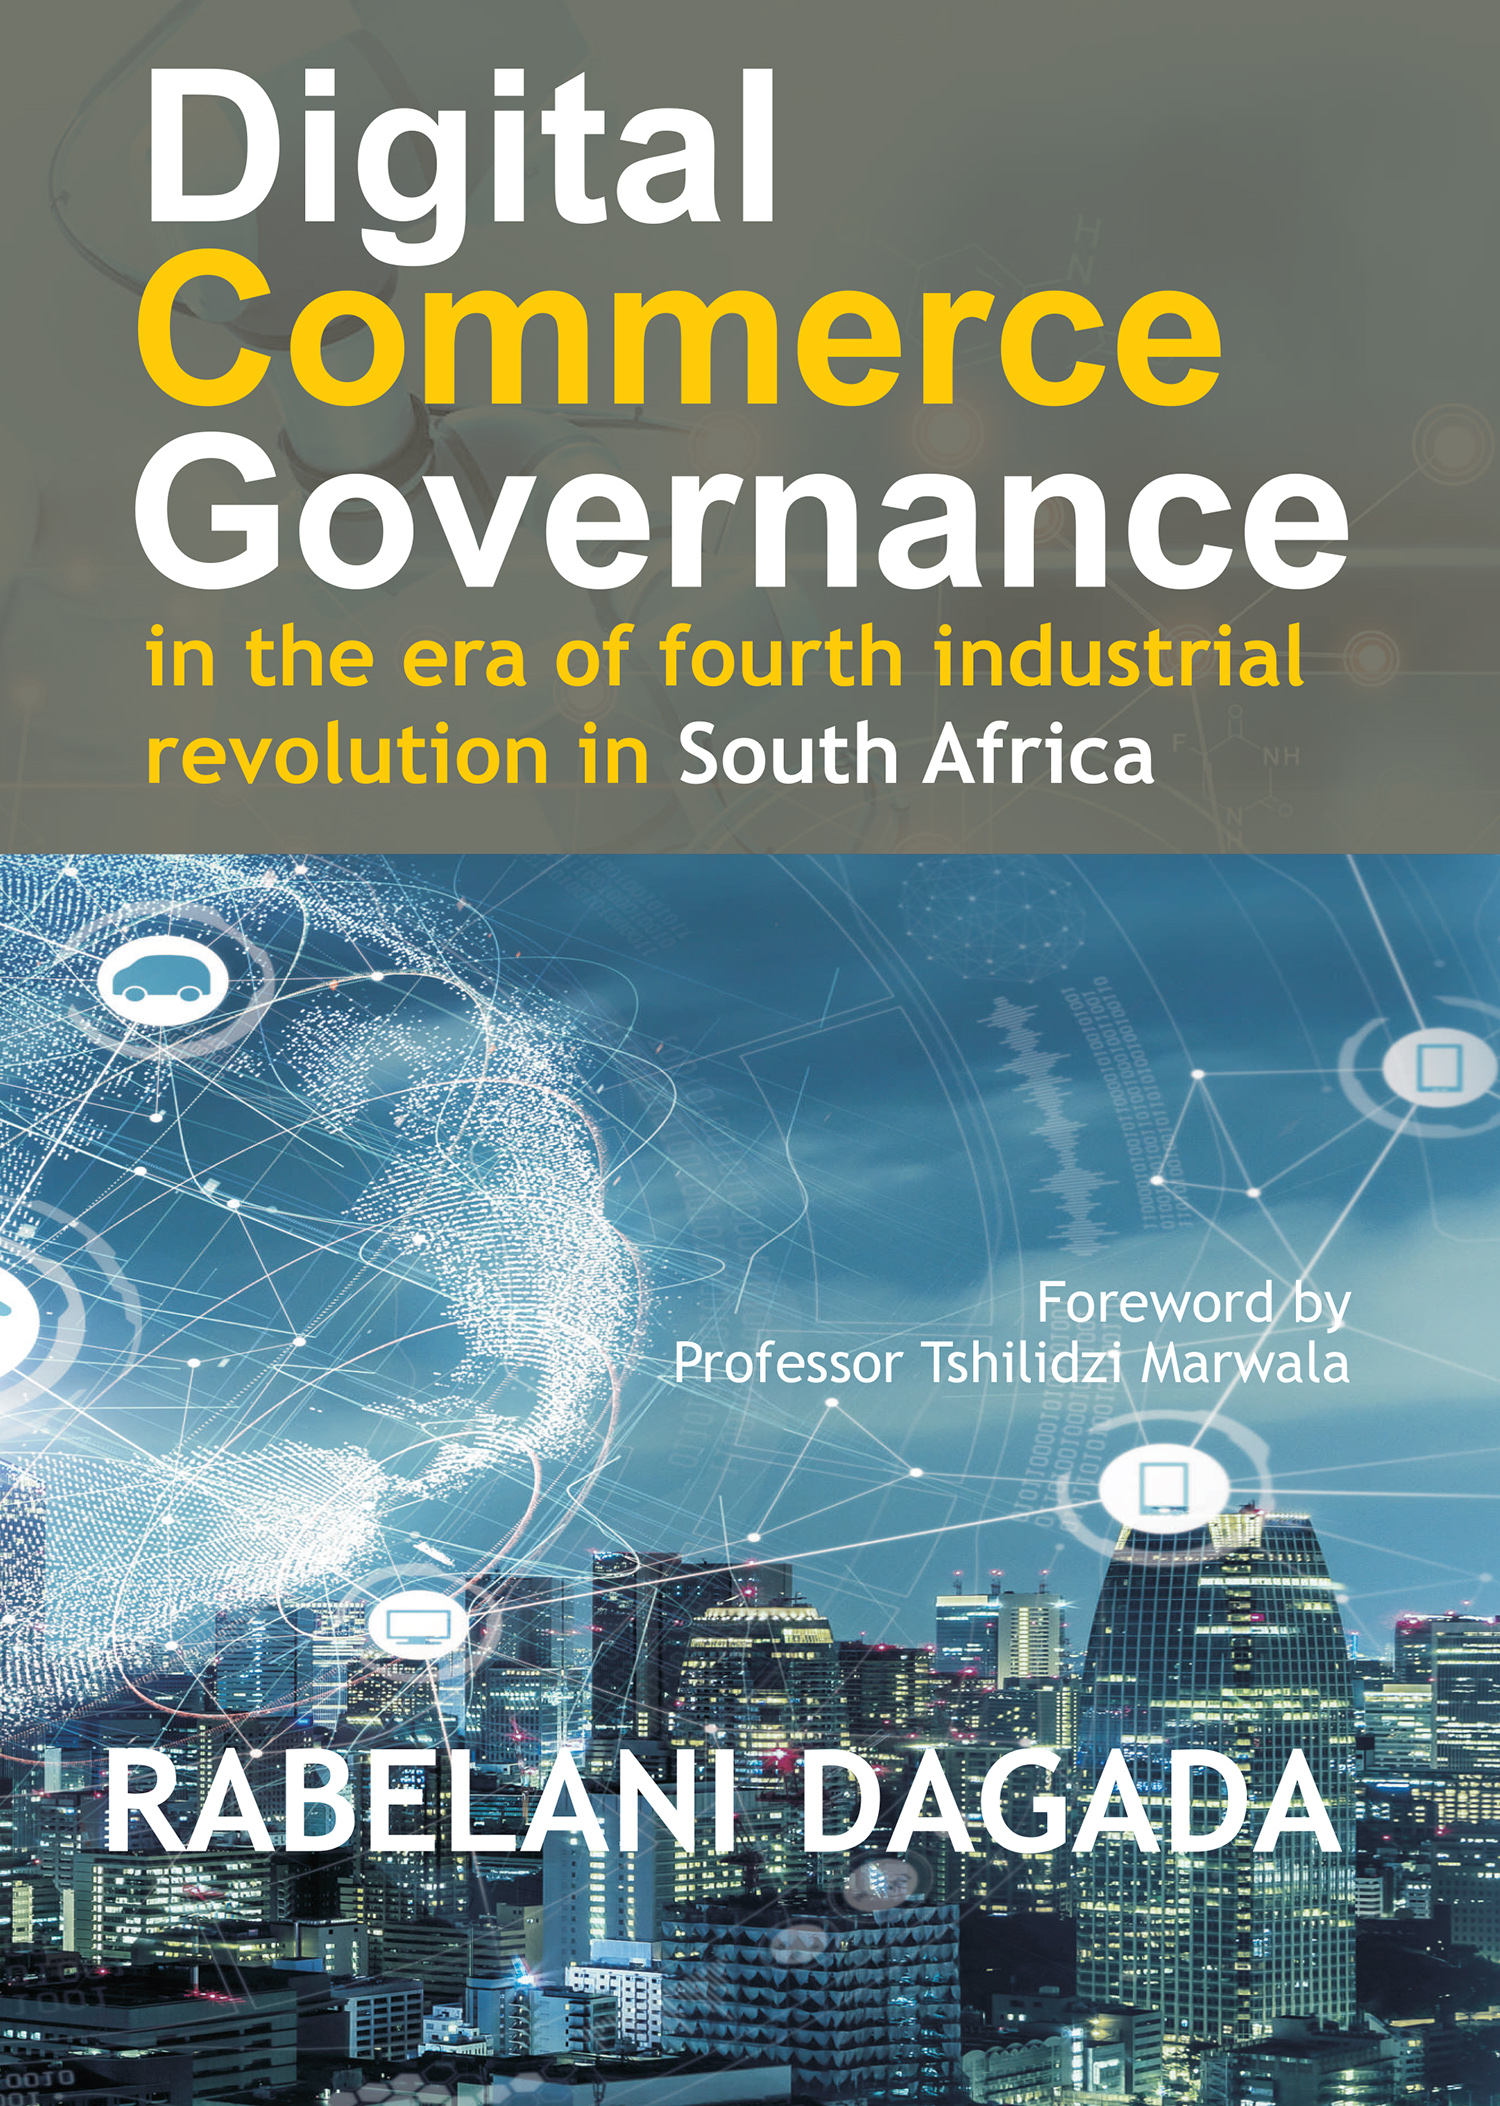 Digital Commerce Governance in the Era of Fourth Industrial Revolution in SA